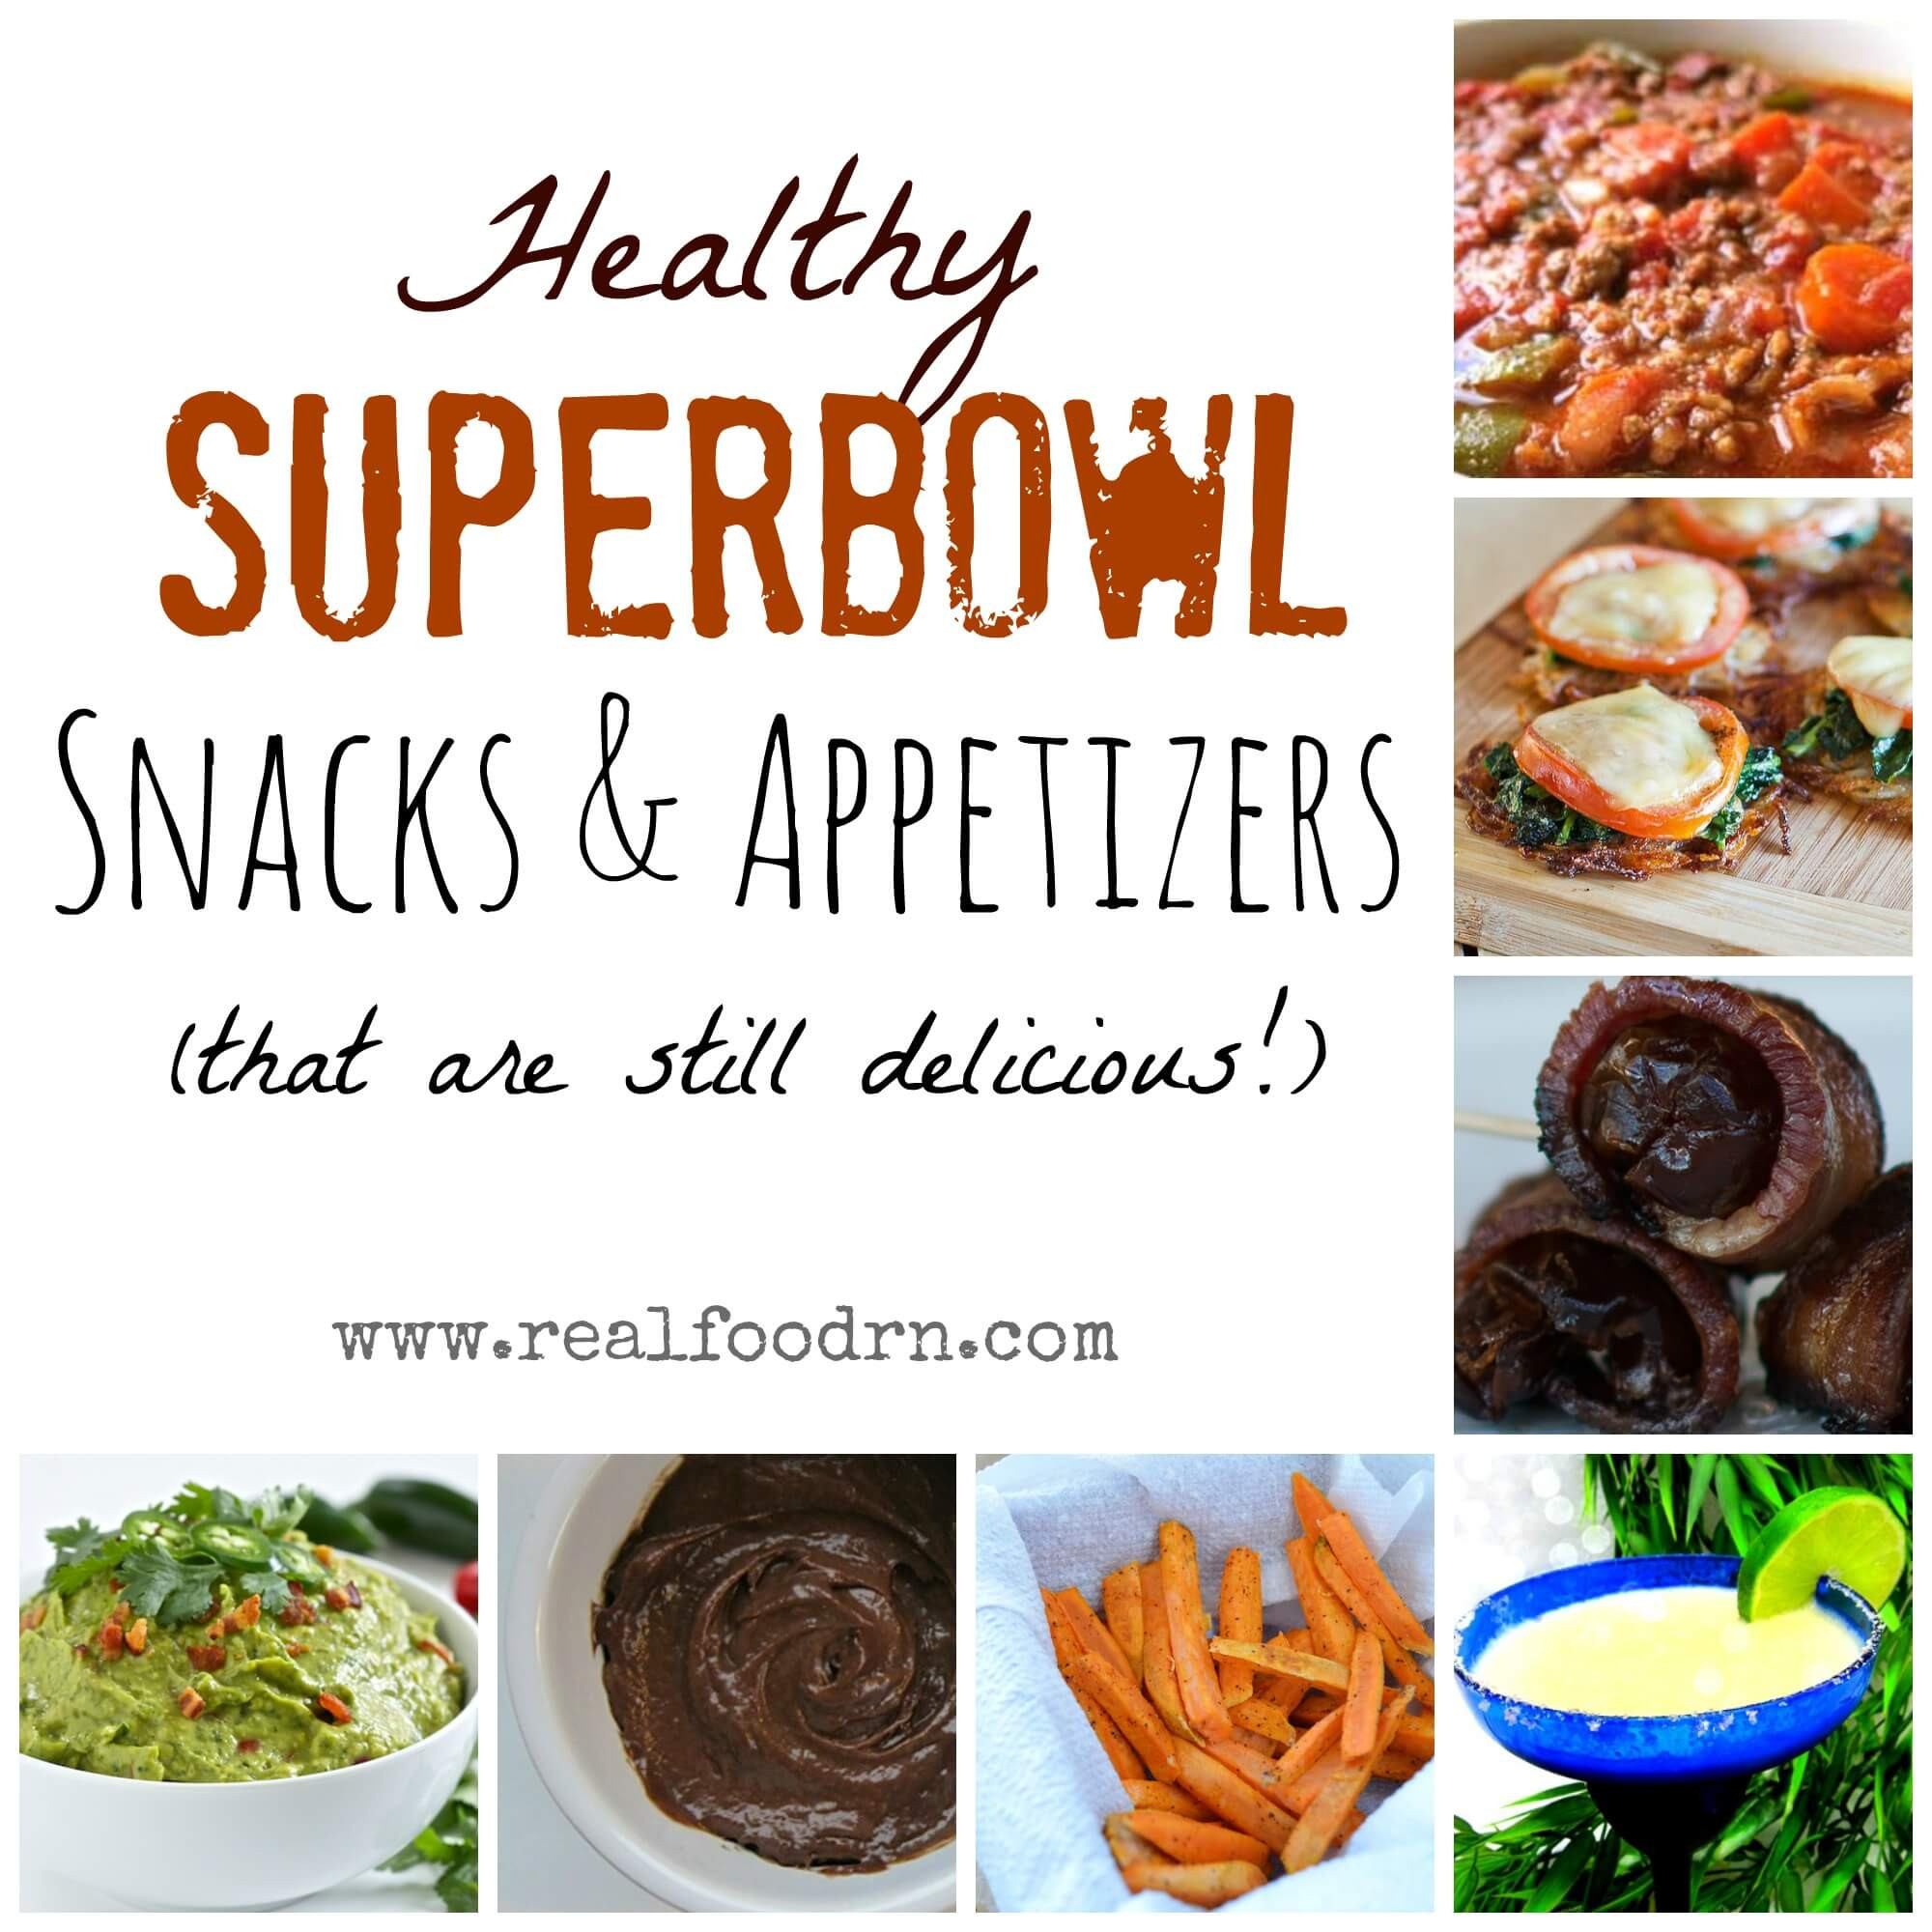 Super Bowl Healthy Appetizers
 Healthy Superbowl Snacks and Appetizers that are still